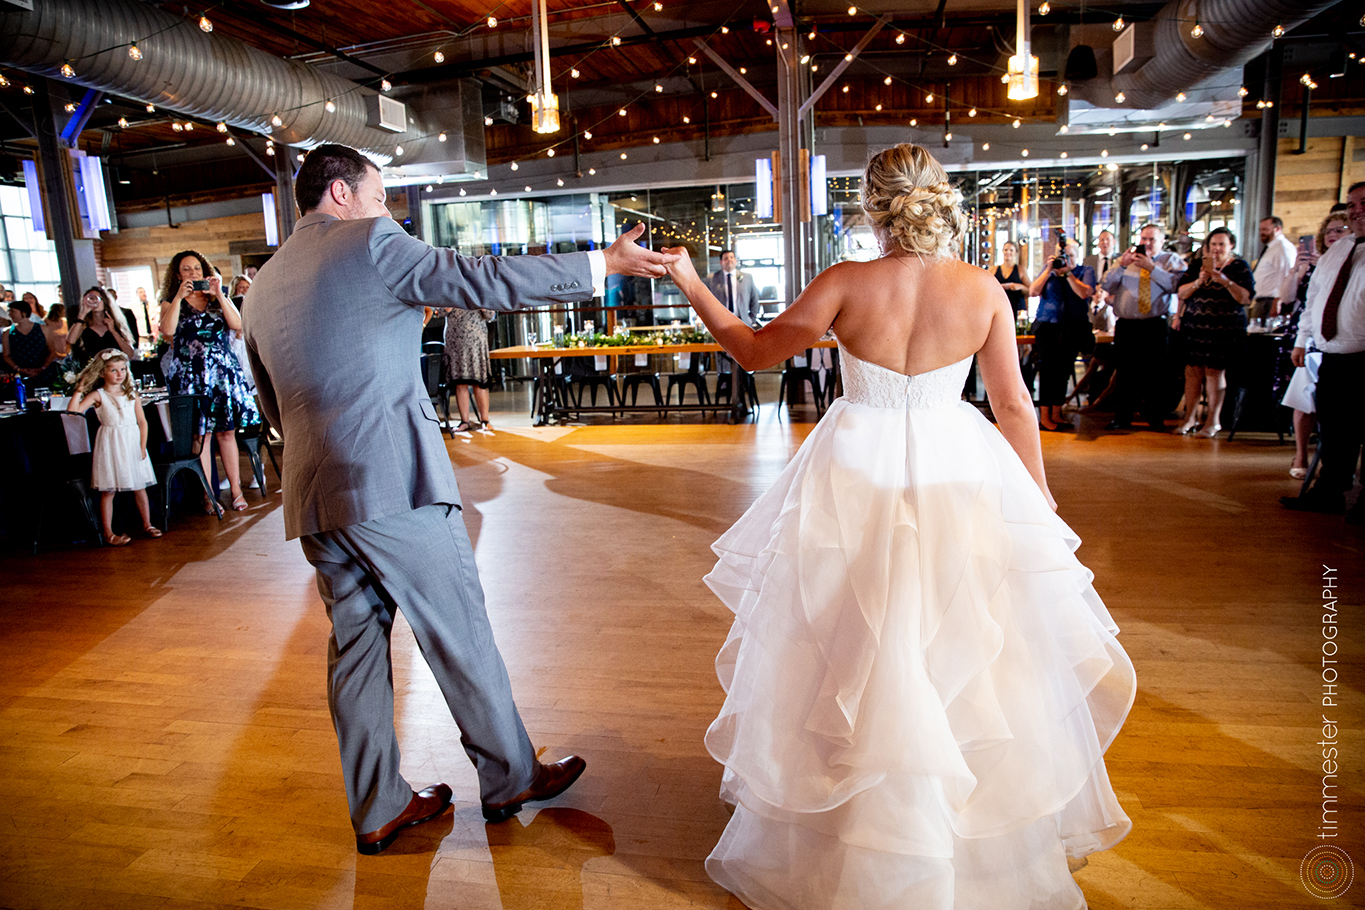 The bride and groom's first dance in Durham, North Carolina at The Rickhouse.